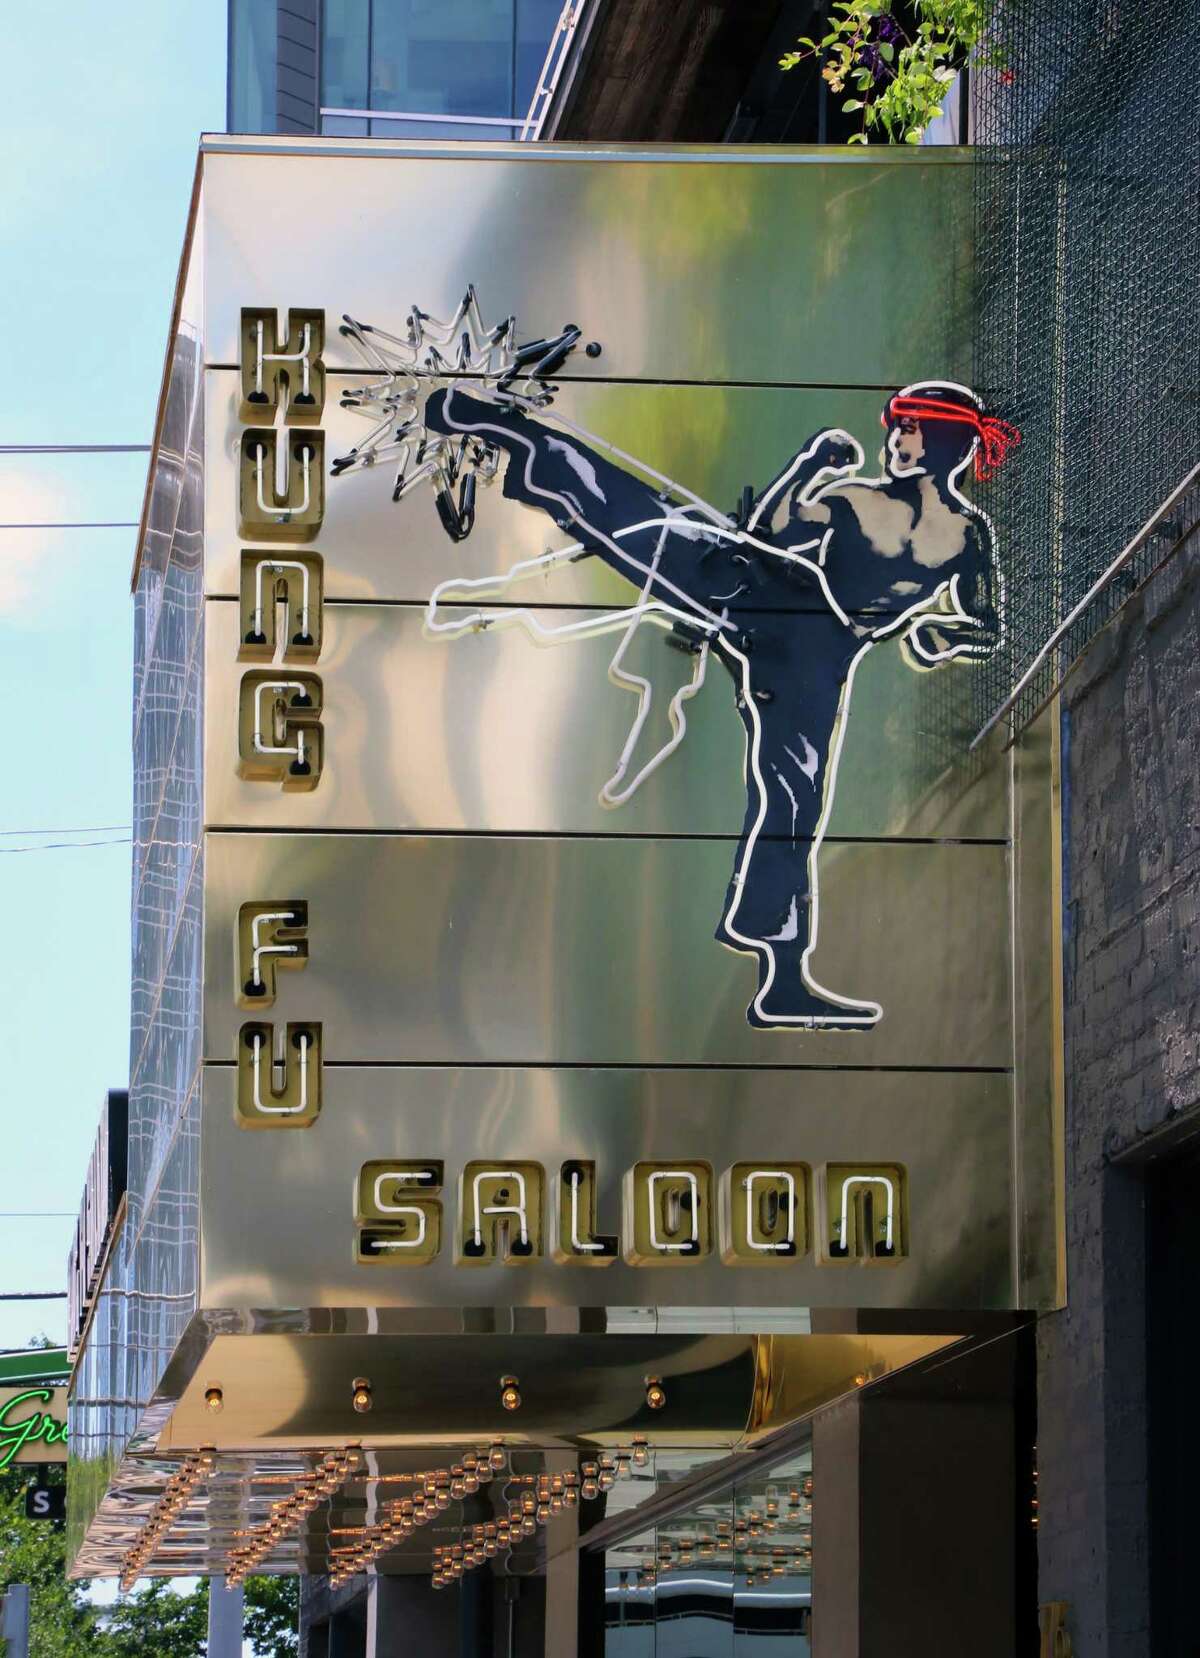 KPG Hospitality plans to open a Kung Fu Saloon location along with another restaurant called Camp 1604 in San Antonio.